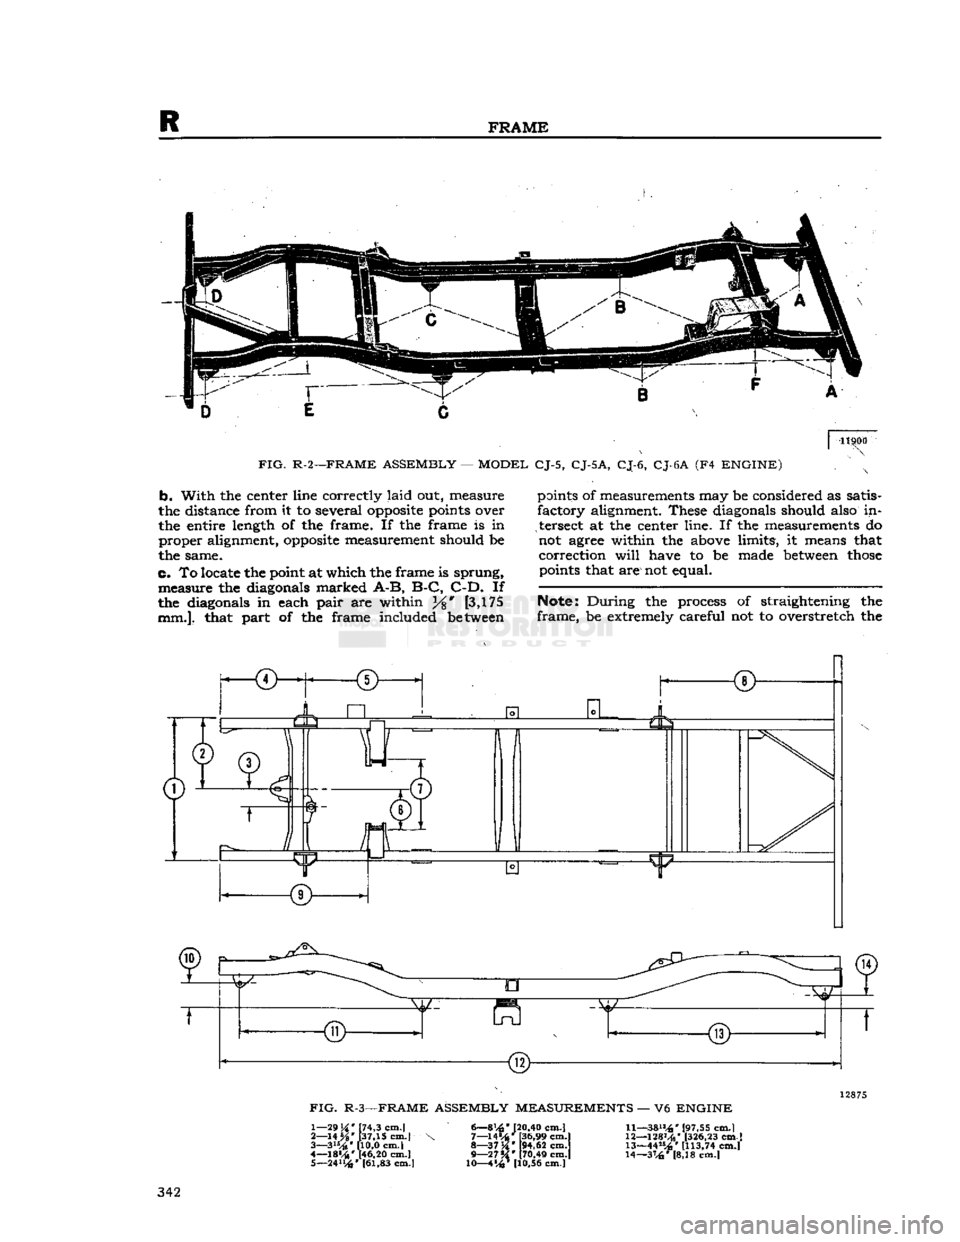 JEEP CJ 1953  Service Manual 
R 

FRAME 

11900 
FIG.
 R-2—FRAME ASSEMBLY
 —
 MODEL
 CJ-5,
 CJ-5A,
 CJ-6,
 CJ-6A
 (F4
 ENGINE) 

b.
 With
 the
 center line correctly
 laid
 out,
 measure 
the distance from
 it to
 several
 op